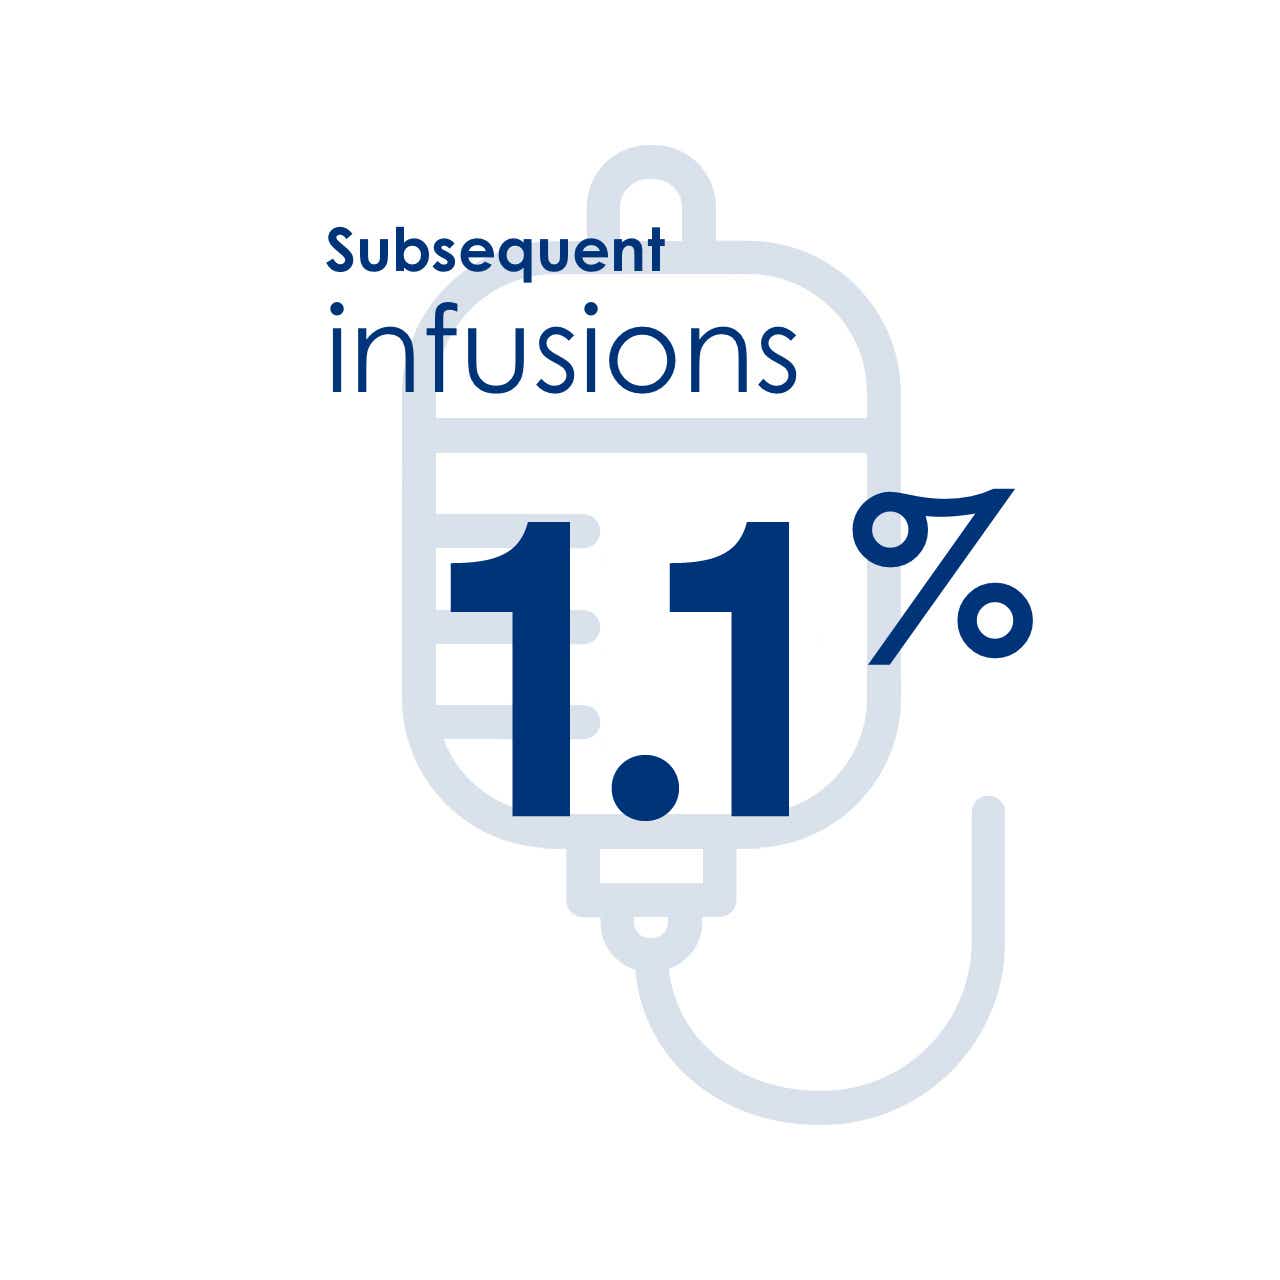 Subsequent infusions 1.0%